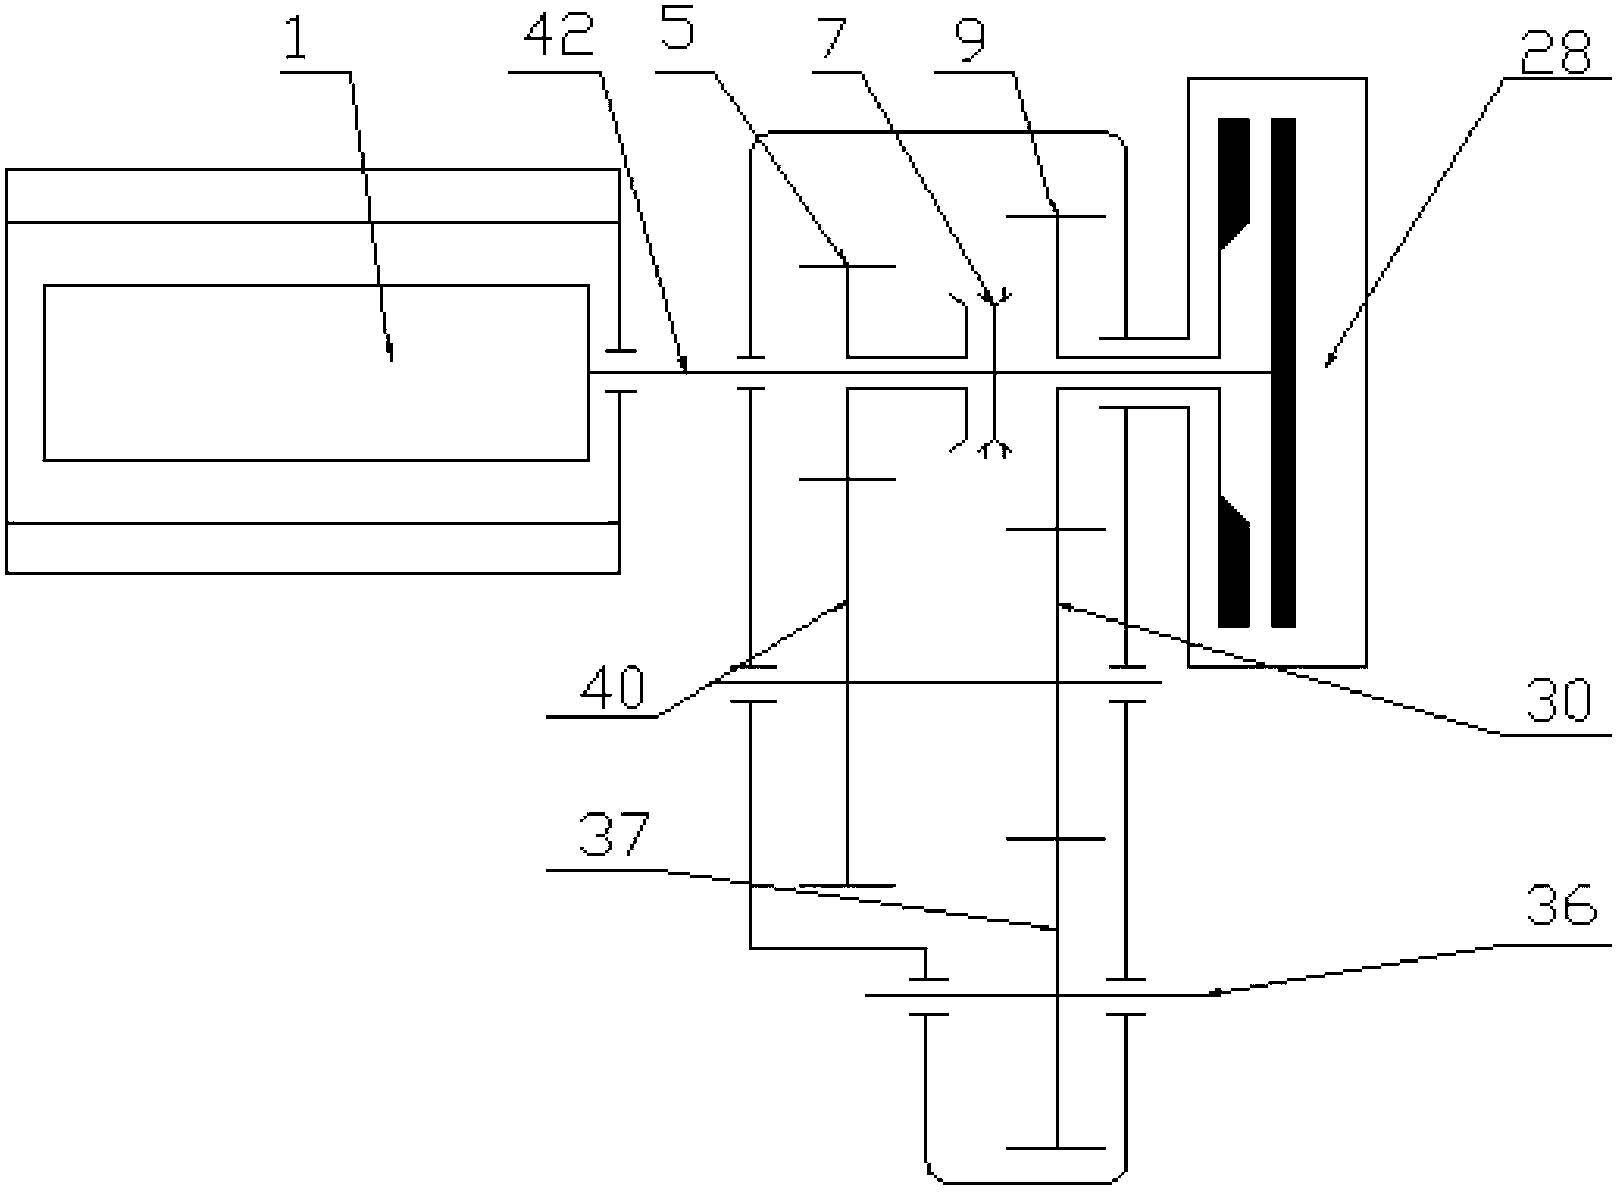 Vertical power-driven device for pure electric vehicle based on mechanical automatic transmission